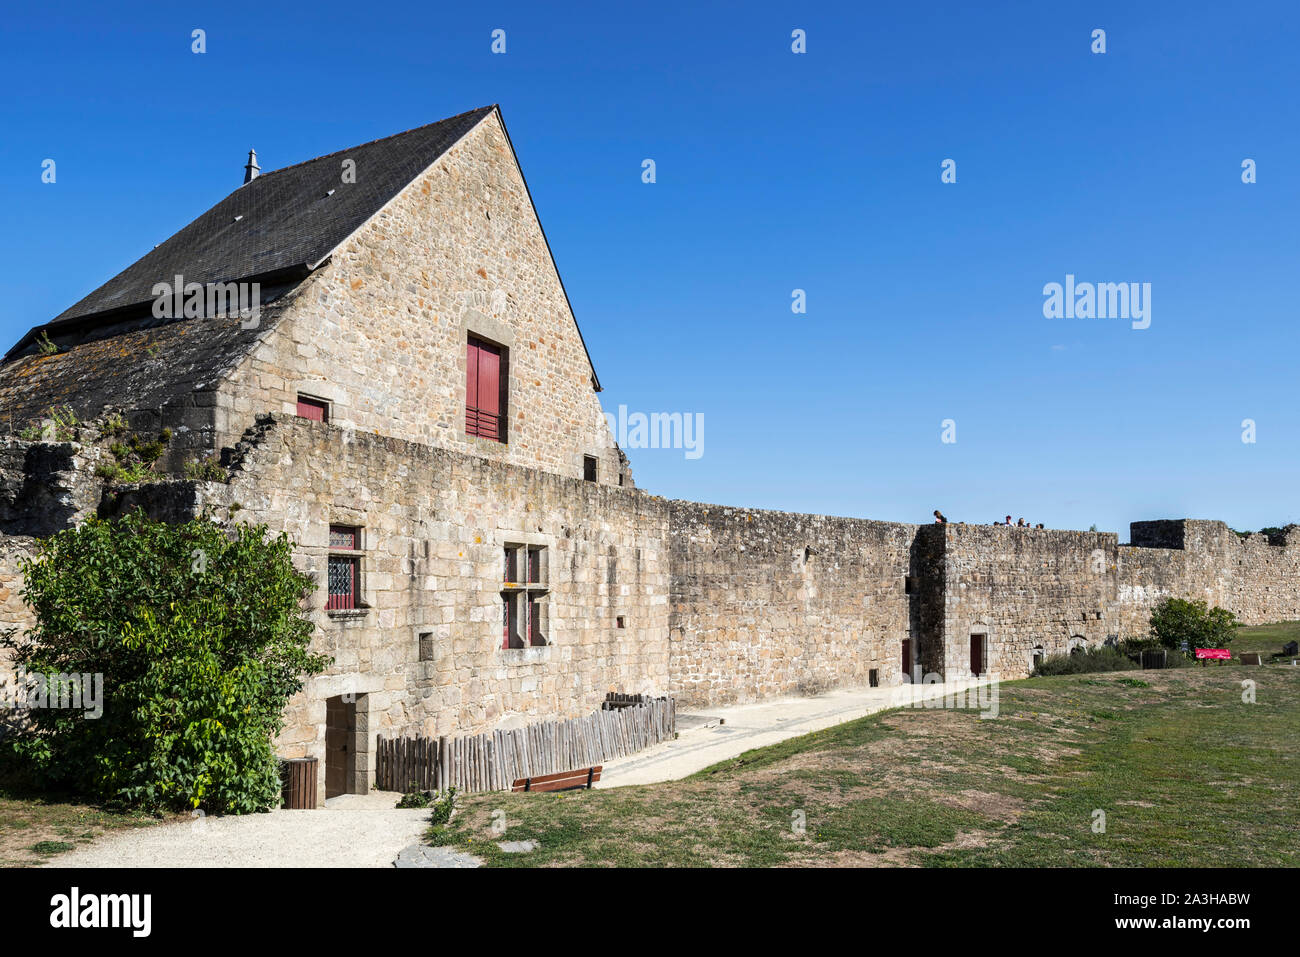 Ramparts and the Vidame tower at the medieval Château de Tiffauges, also known as the château de Barbe-bleue / Bluebeard's castle, Vendée, France Stock Photo